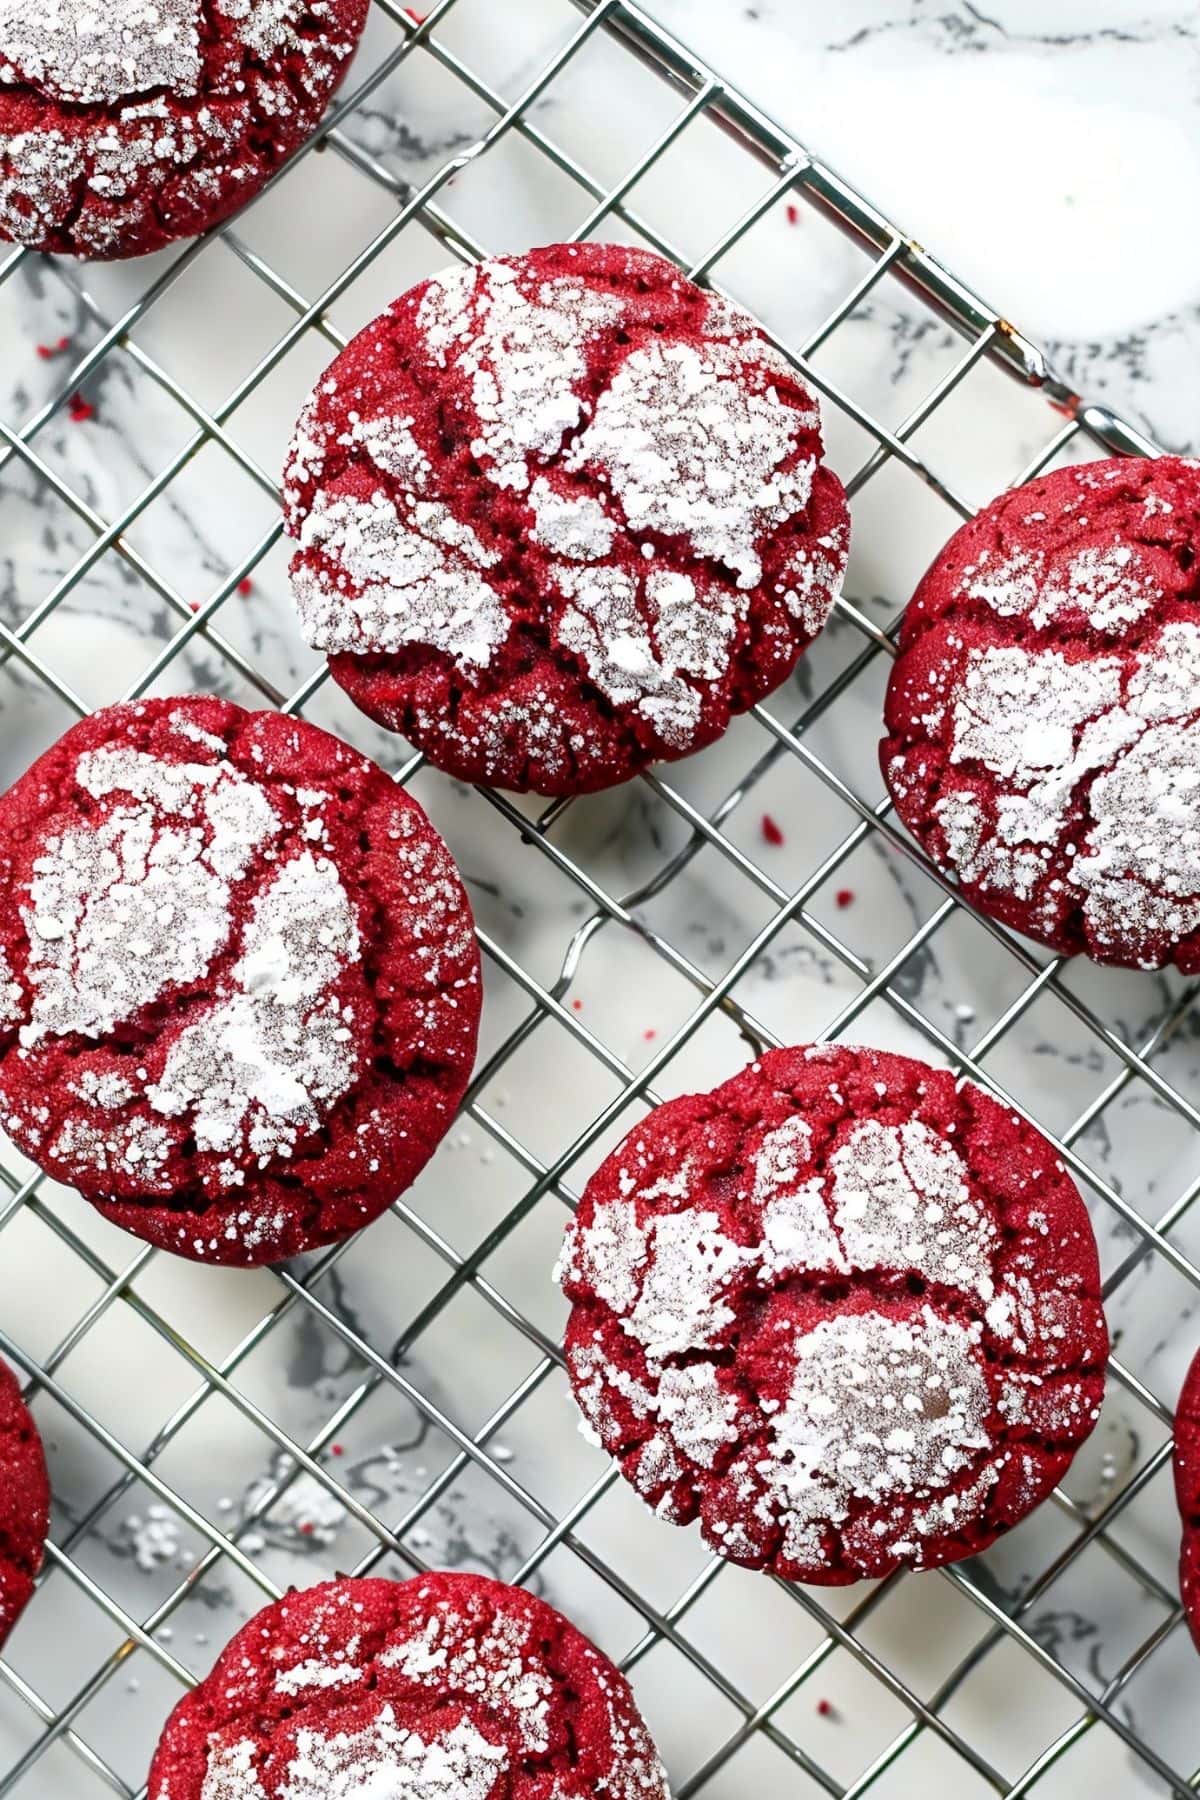 Top View of Red Velvet Crinkle Cookies with Powdered Sugar Dusting on a Wire Rack